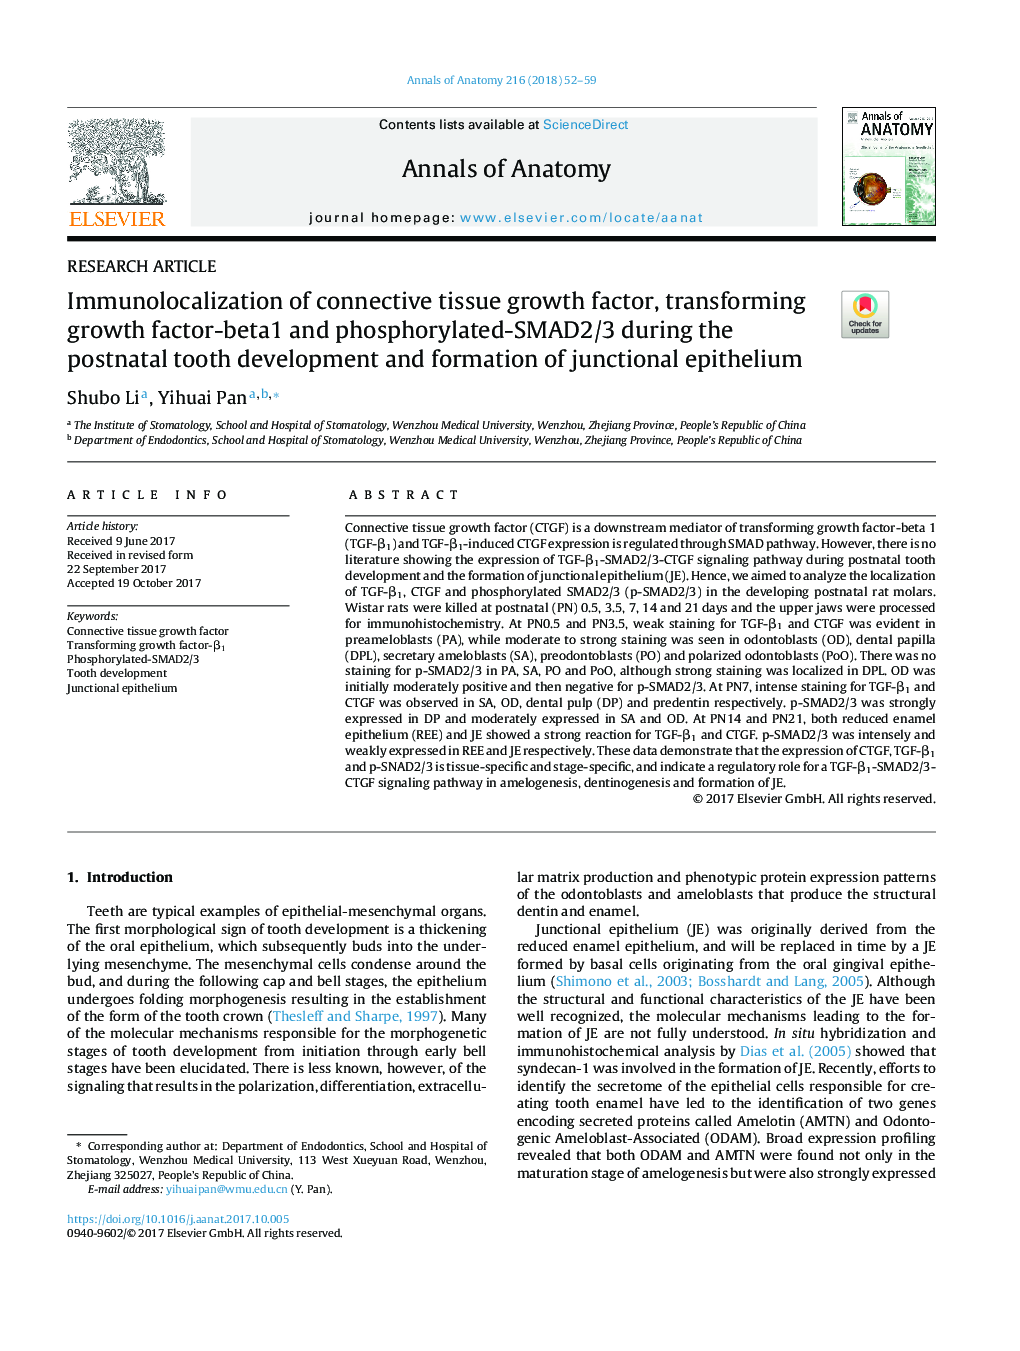 Immunolocalization of connective tissue growth factor, transforming growth factor-beta1 and phosphorylated-SMAD2/3 during the postnatal tooth development and formation of junctional epithelium